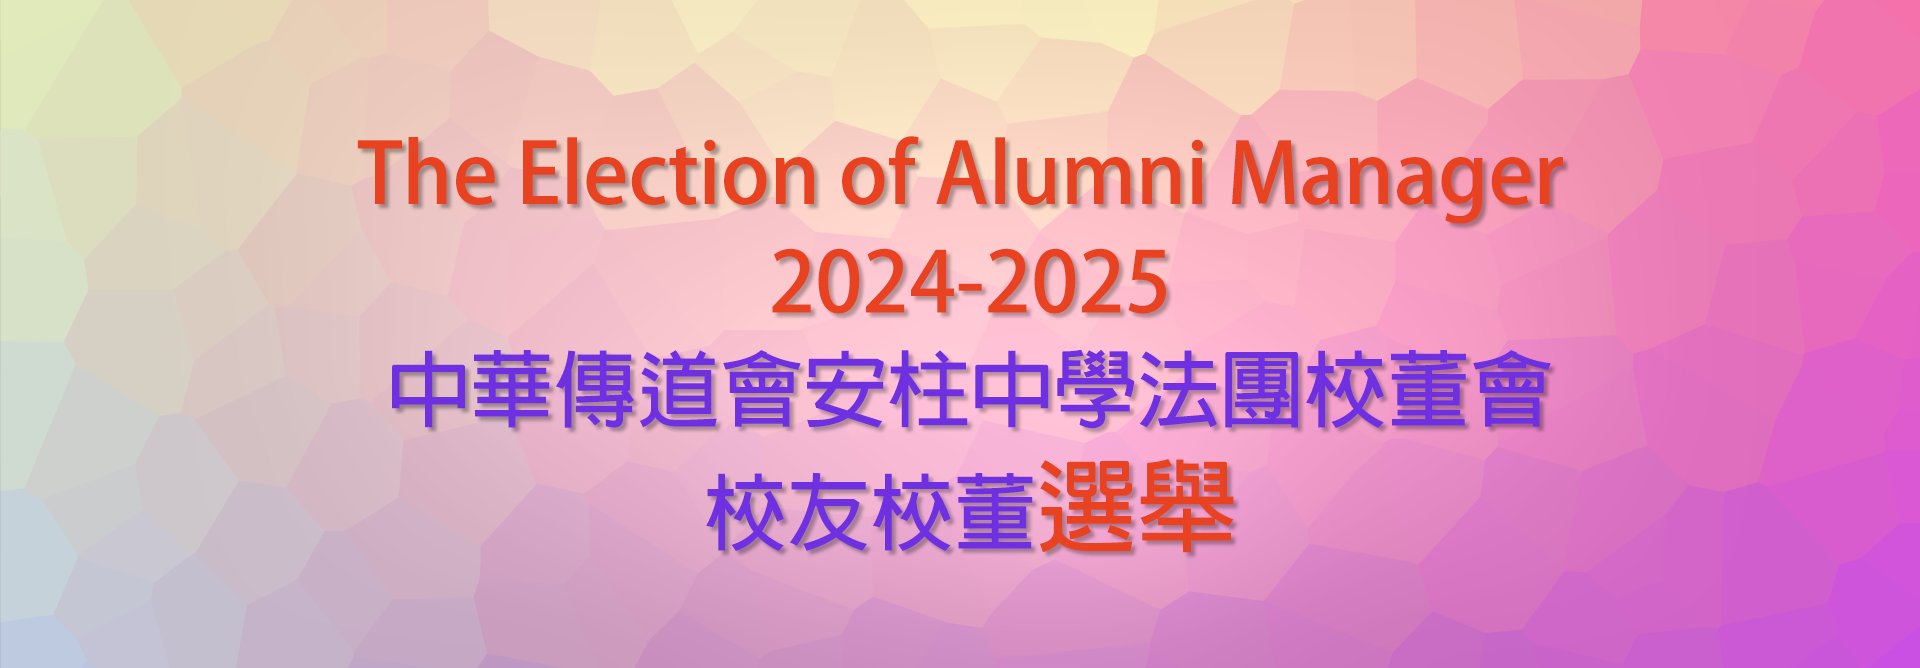 The Election of School Manager 2024-2025